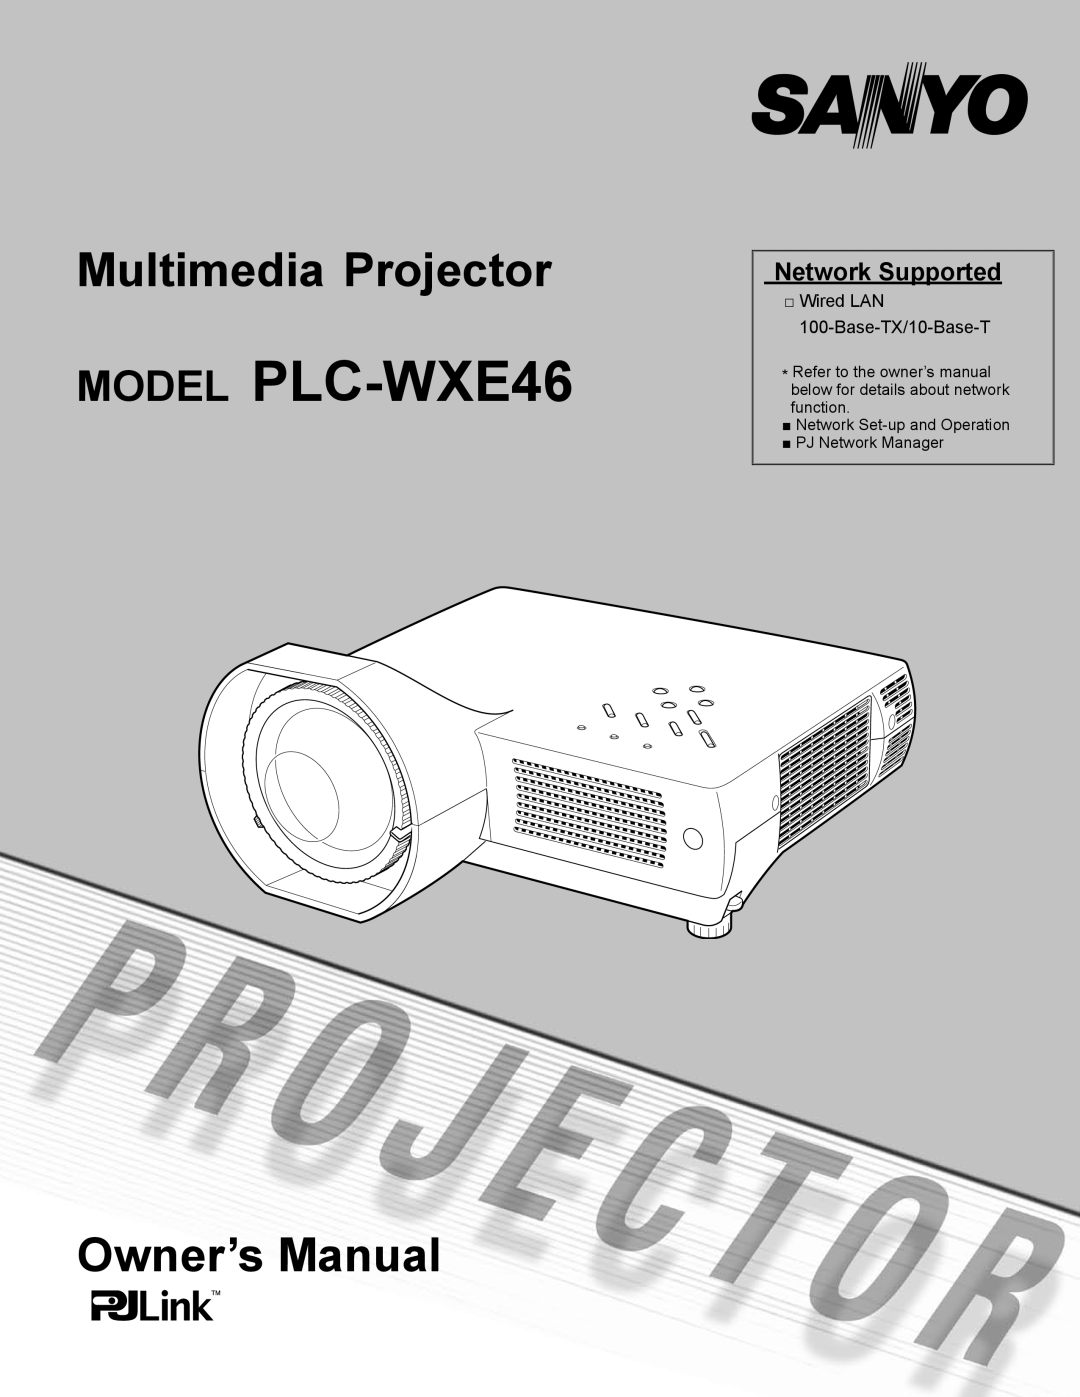 Sanyo owner manual Network Supported, MODEL PLC-WXE46, Multimedia Projector, Owner’s Manual 